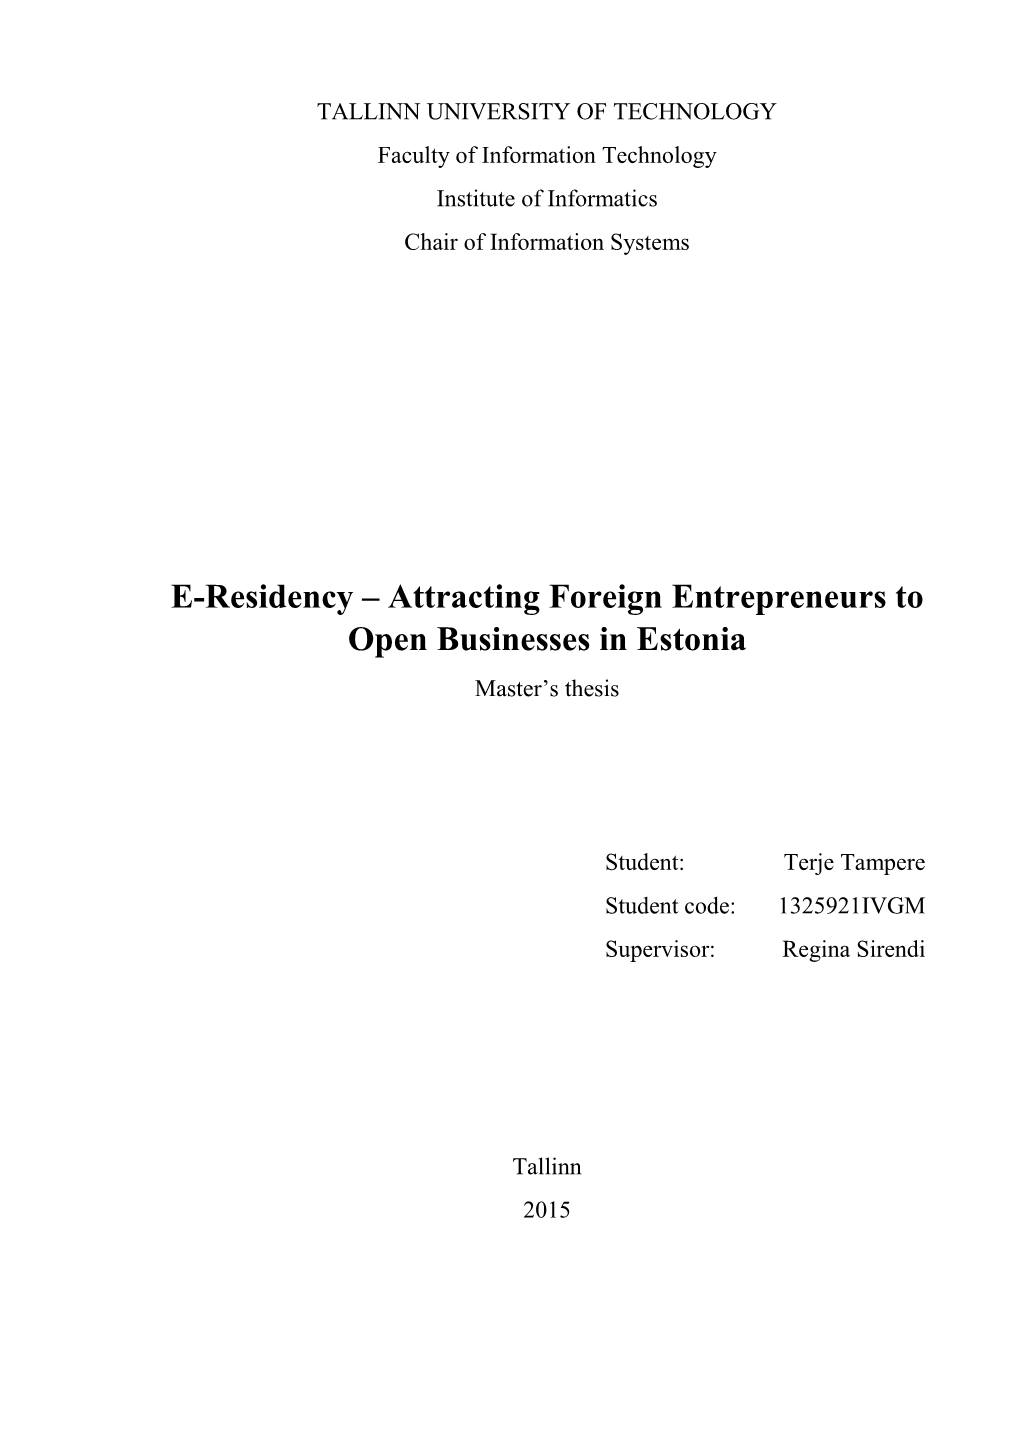 E-Residency – Attracting Foreign Entrepreneurs to Open Businesses in Estonia Master’S Thesis